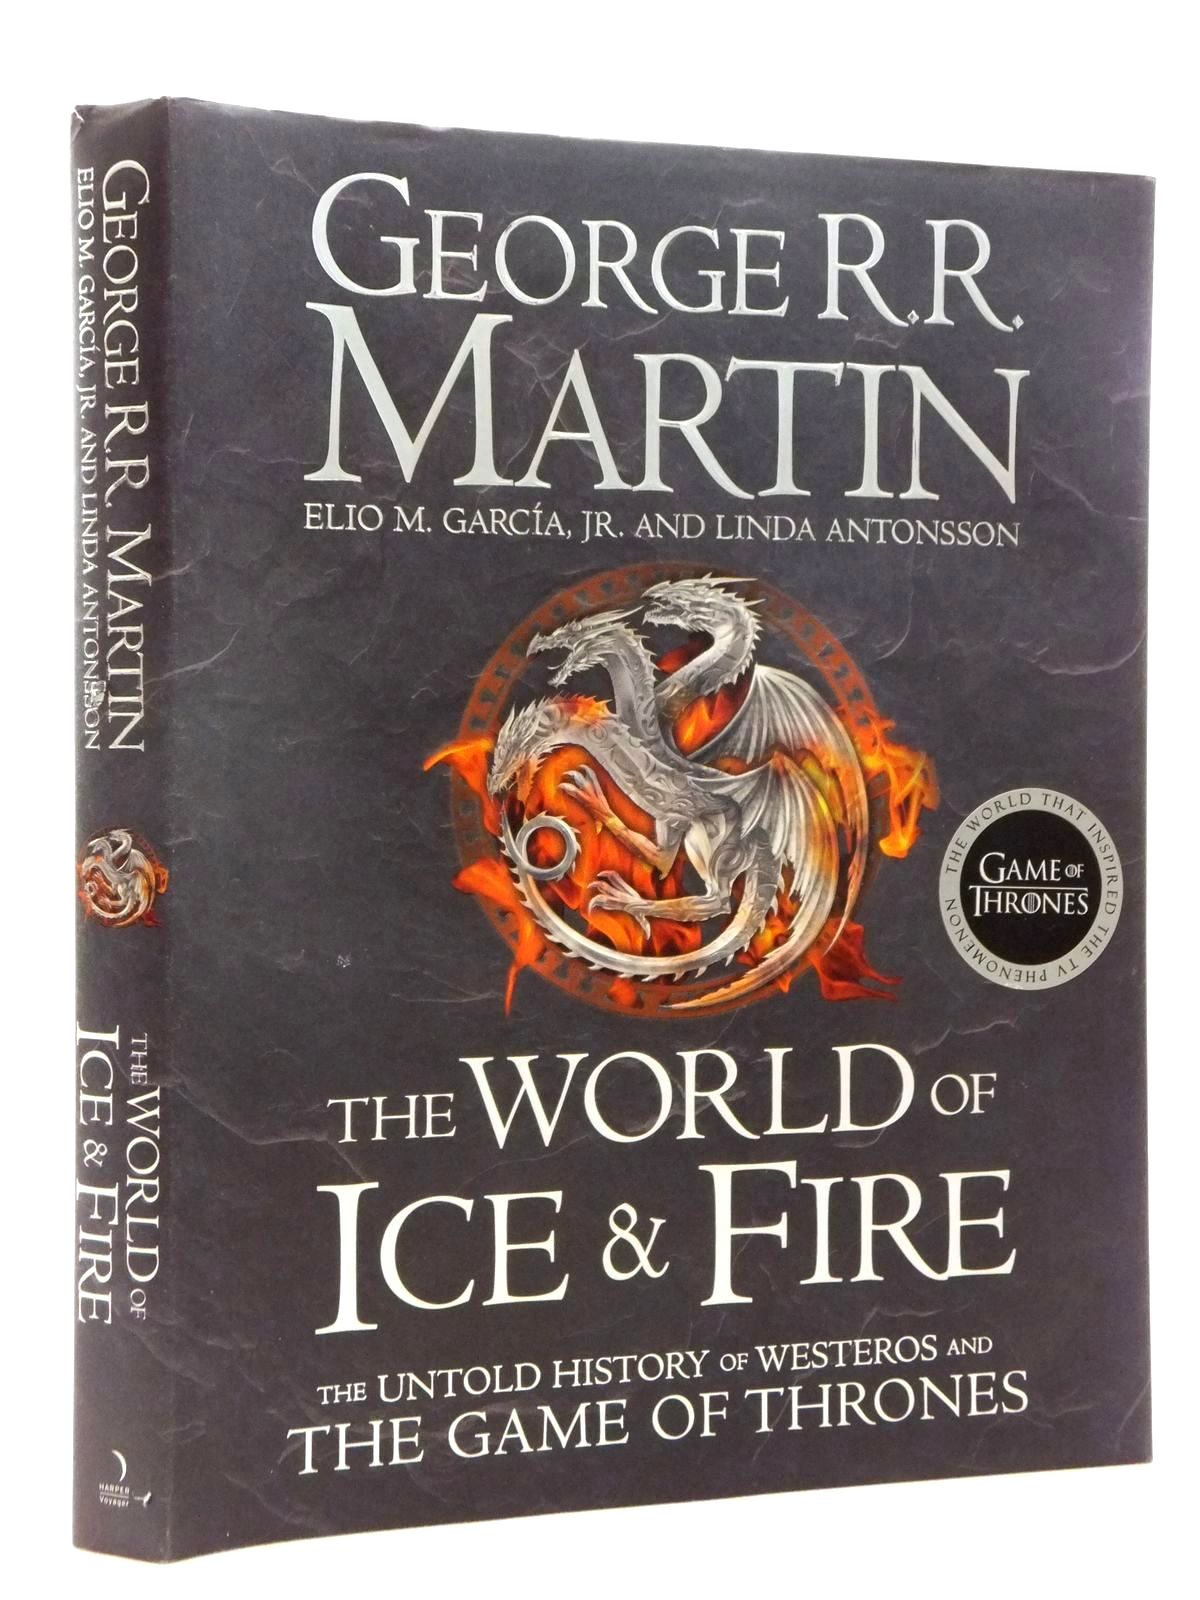 The World Of Ice & Fire: The Untold History Of Westeros And The Game Of Thrones